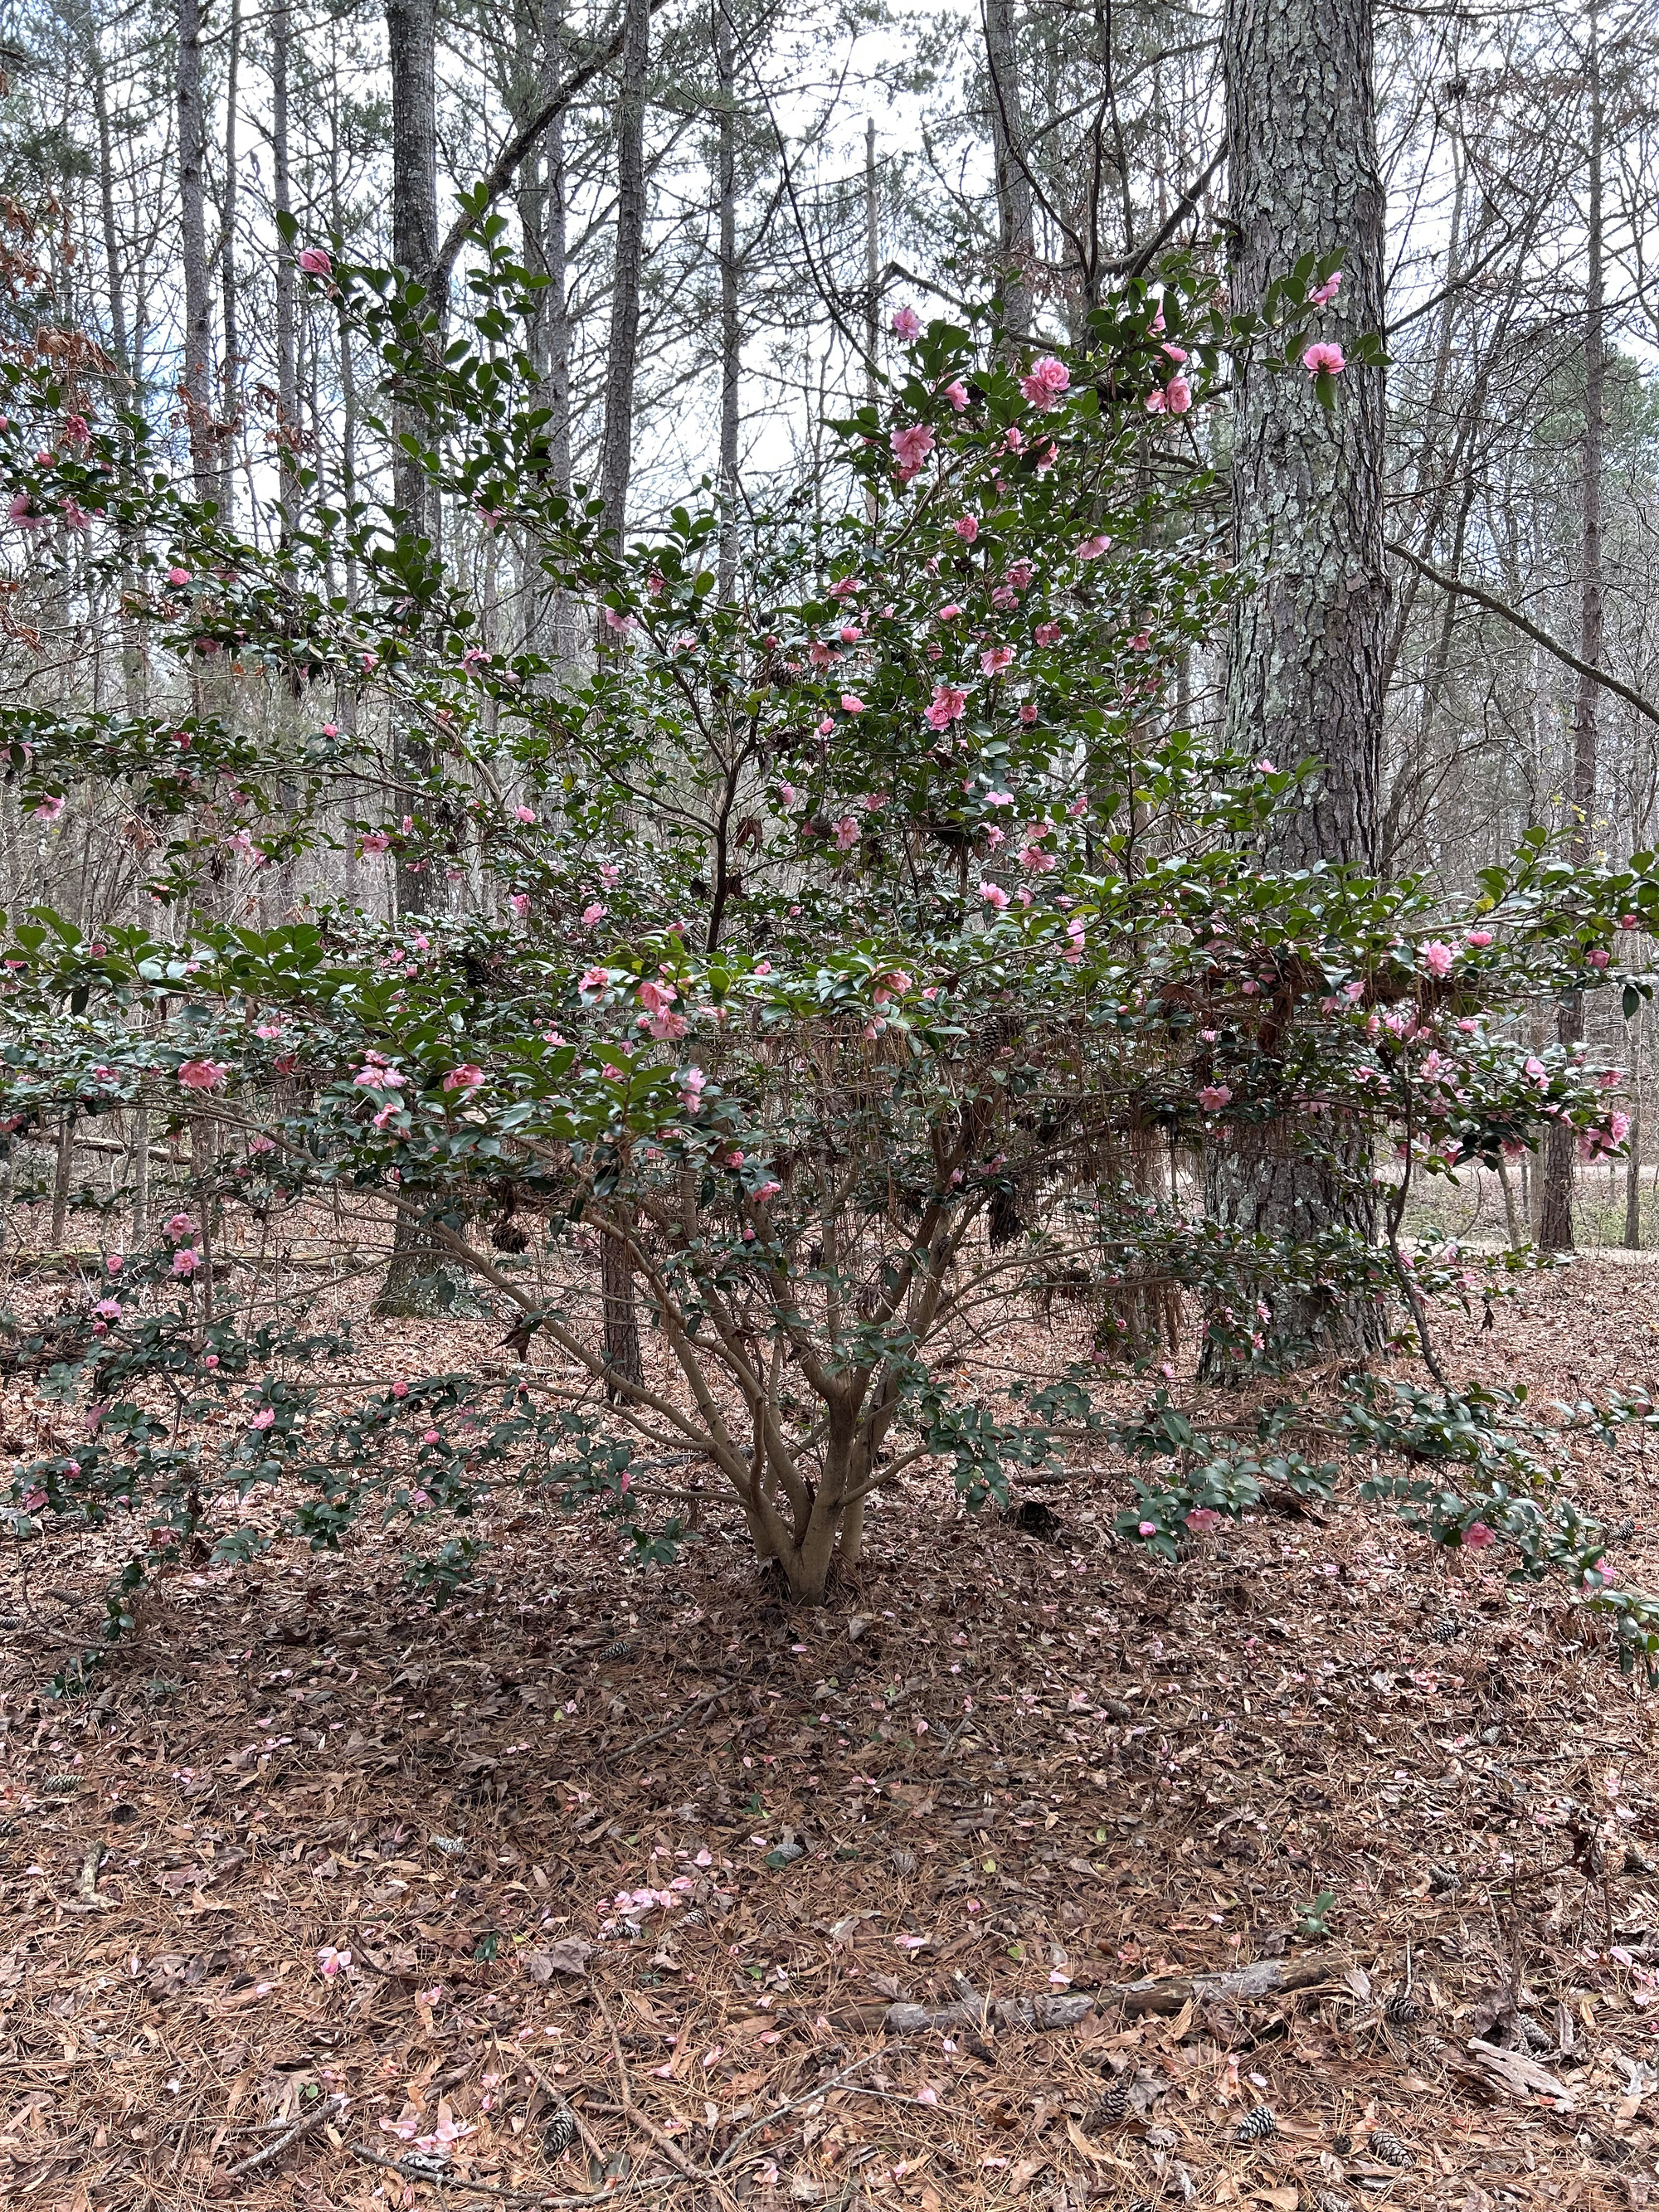 There were lots of Camellia trees in the park. I was happy to see flowers in winter and had to take a picture to find out what kind of tree blooms in January!